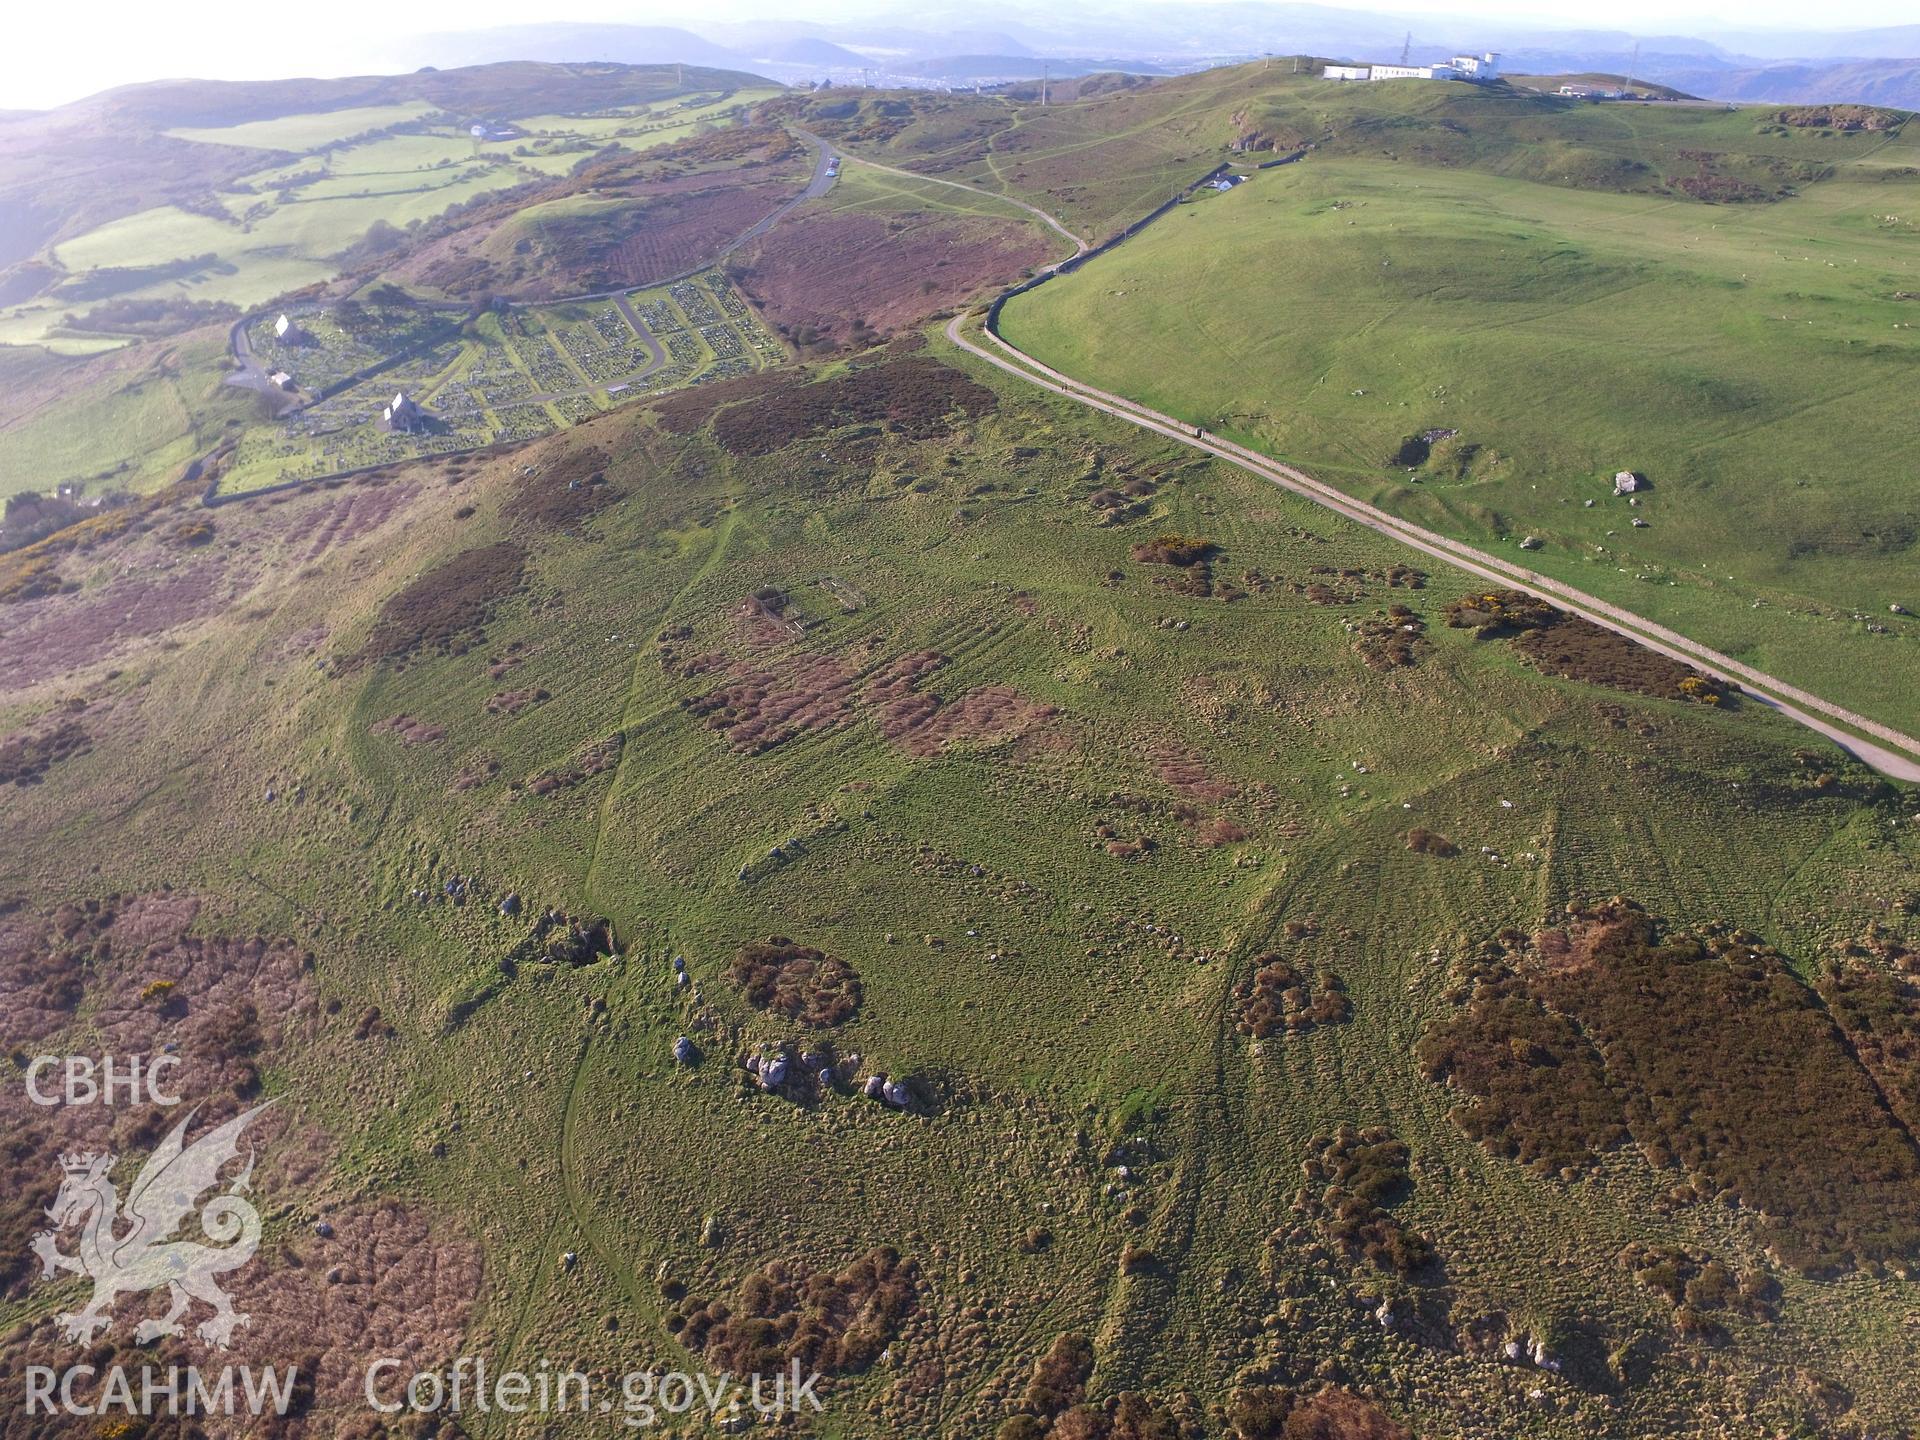 Colour photo showing aerial view of Hwylfa'r Ceirw deserted rural settlement on the Great Orme, Llandudno, taken by Paul R. Davis, 19th April 2018.